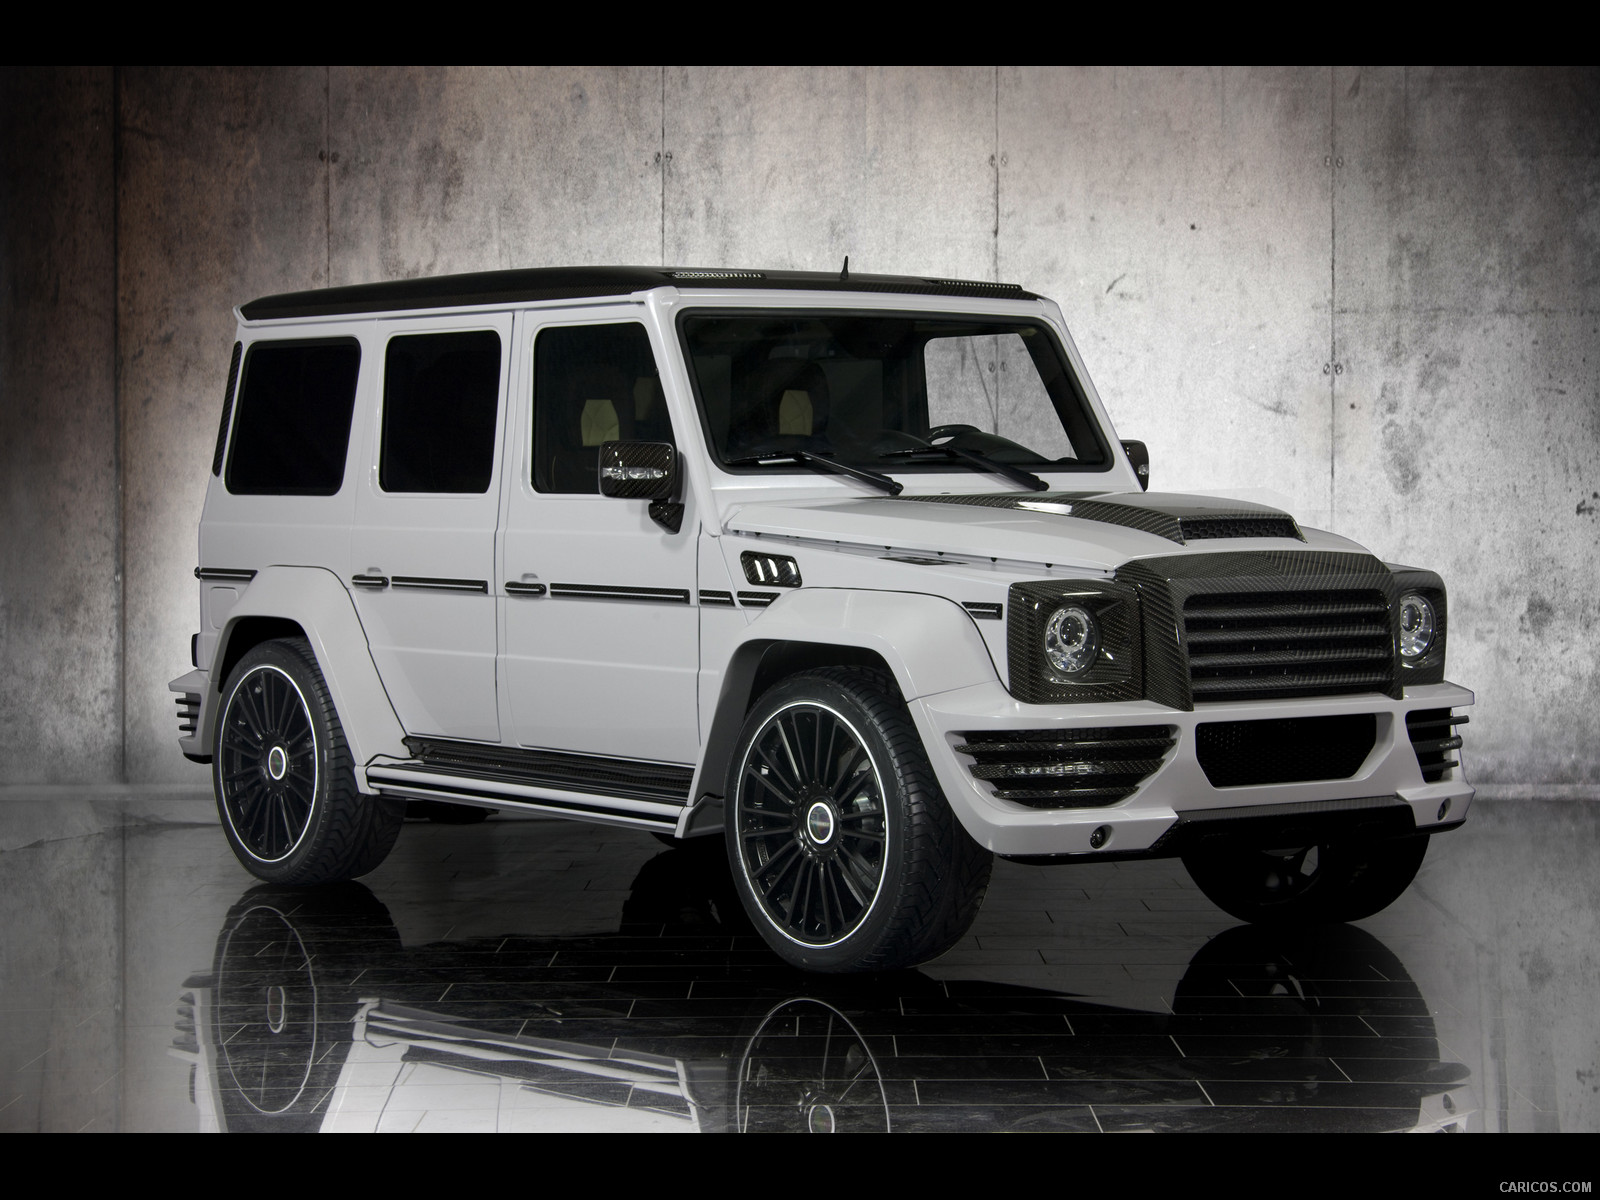 Mansory G-Couture based on Mercedes G-Class White - Front, #14 of 39